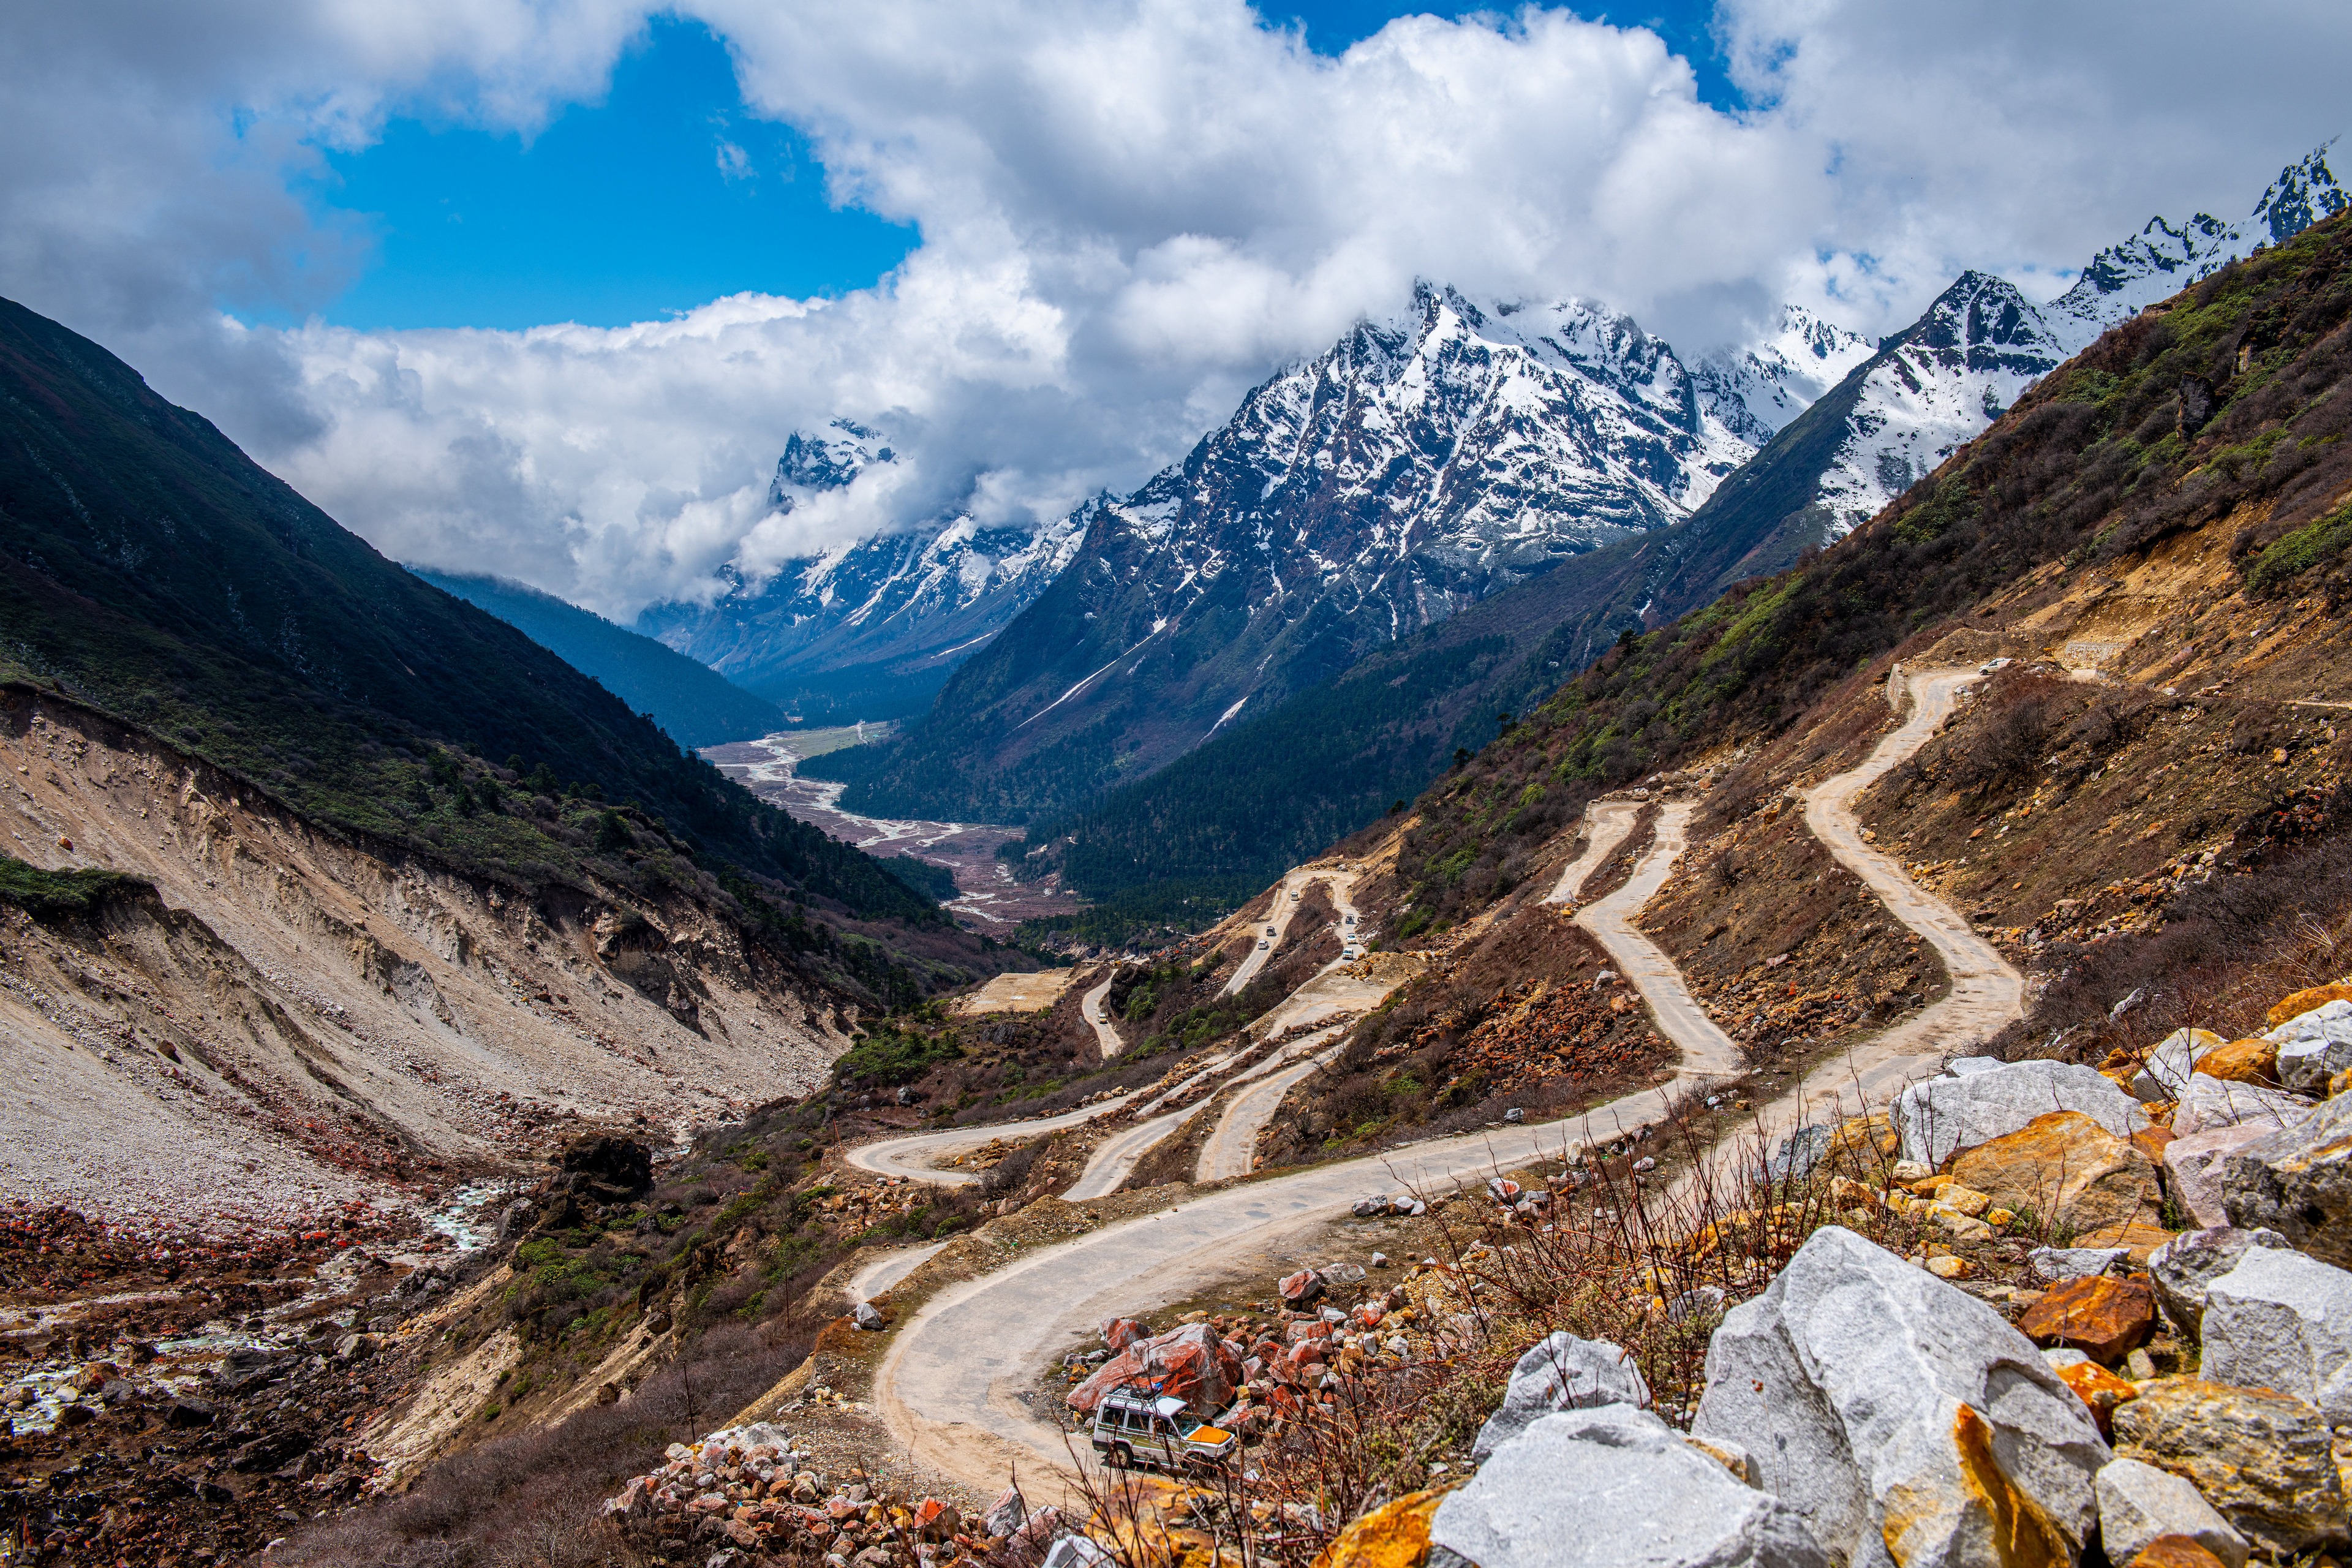 General 3840x2560 India mountains sky road clouds nature landscape stones rocks snow path hairpin turns